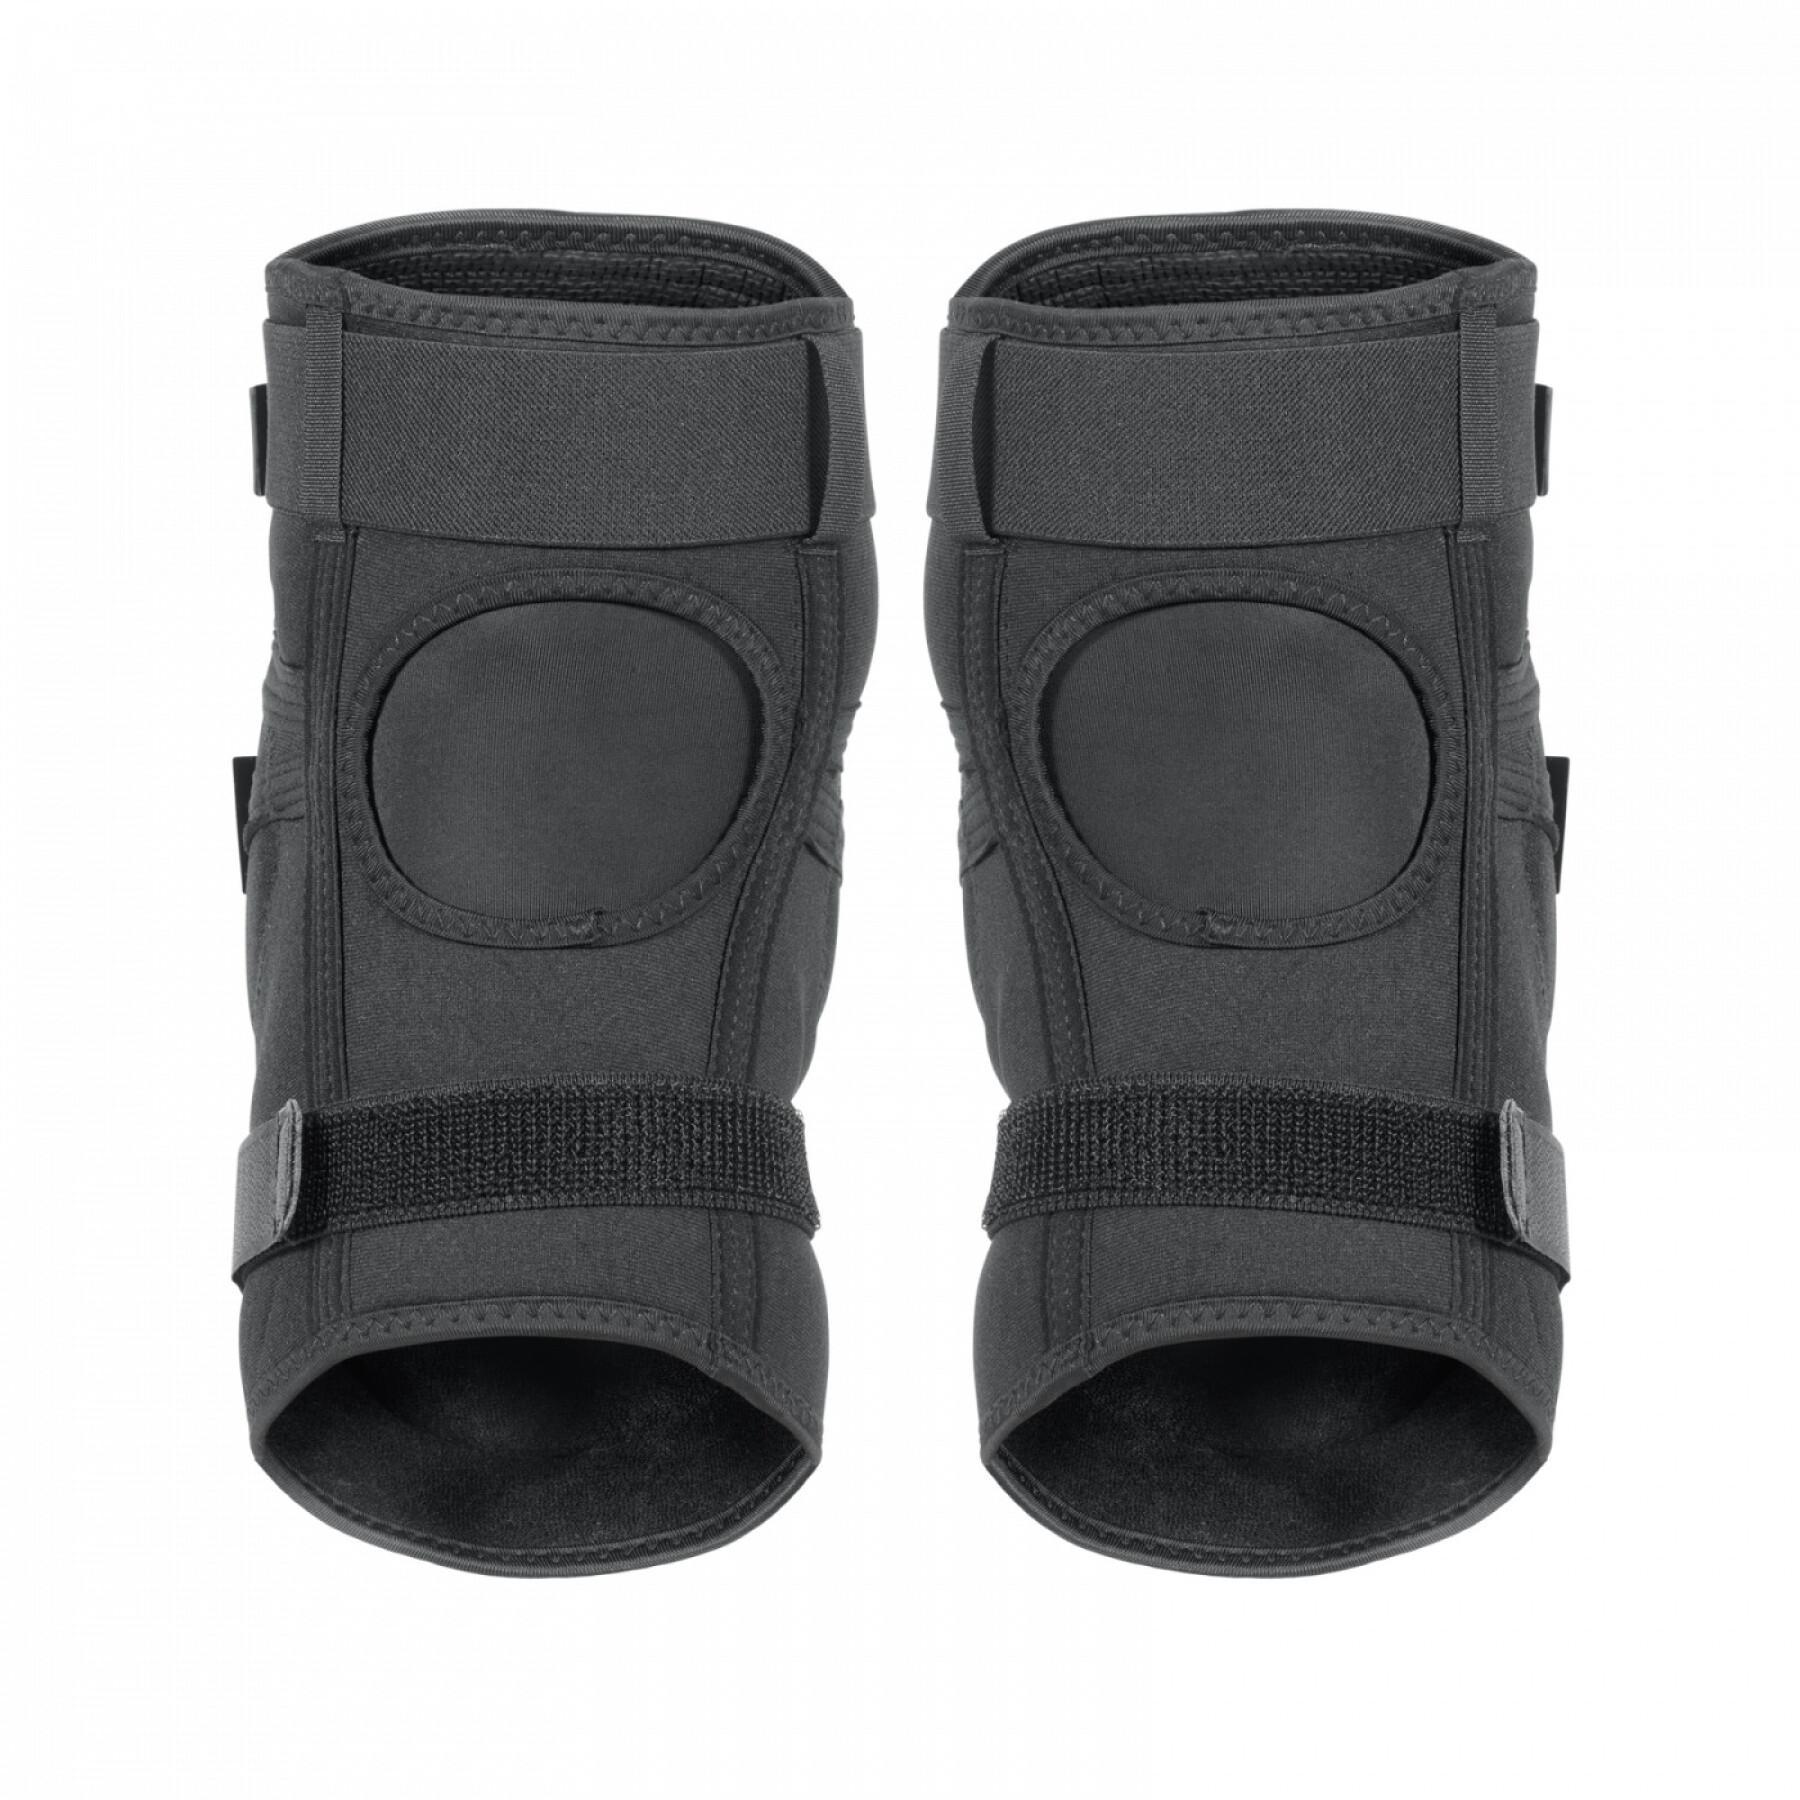 Knee protection for bicycles TSG Tahoe A